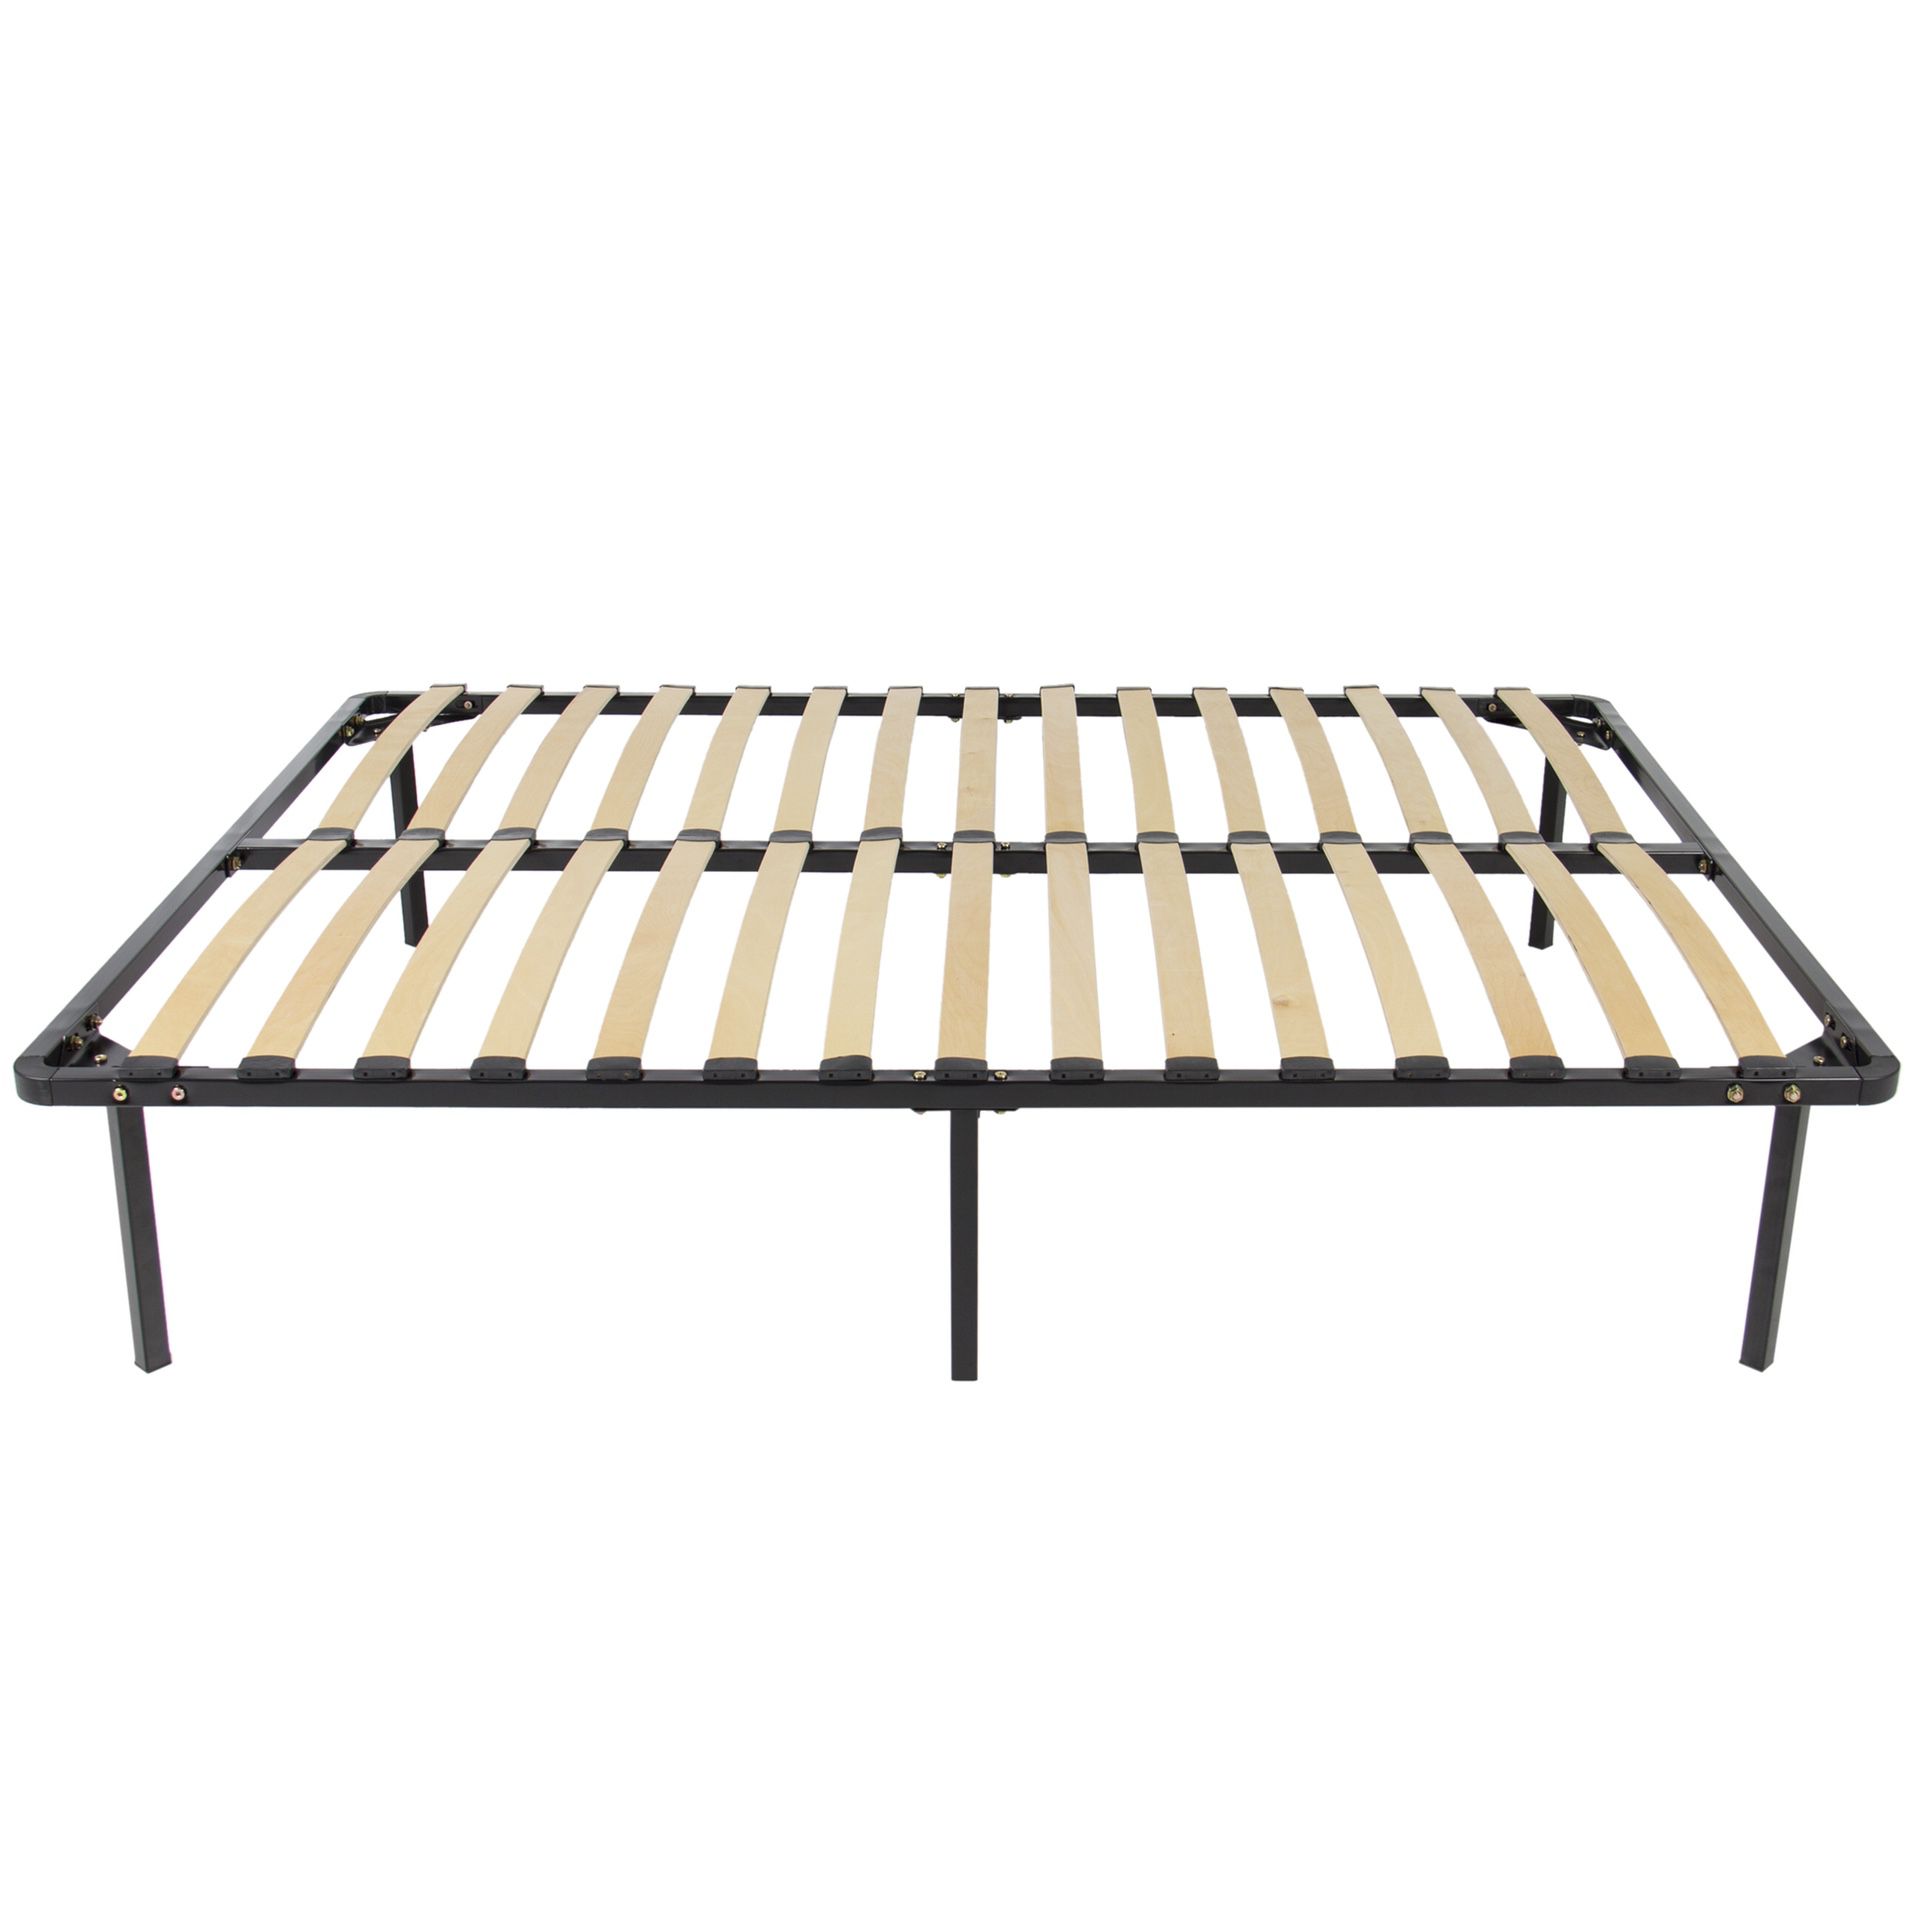 Moving sale Queen platform bed frame with wooden slated